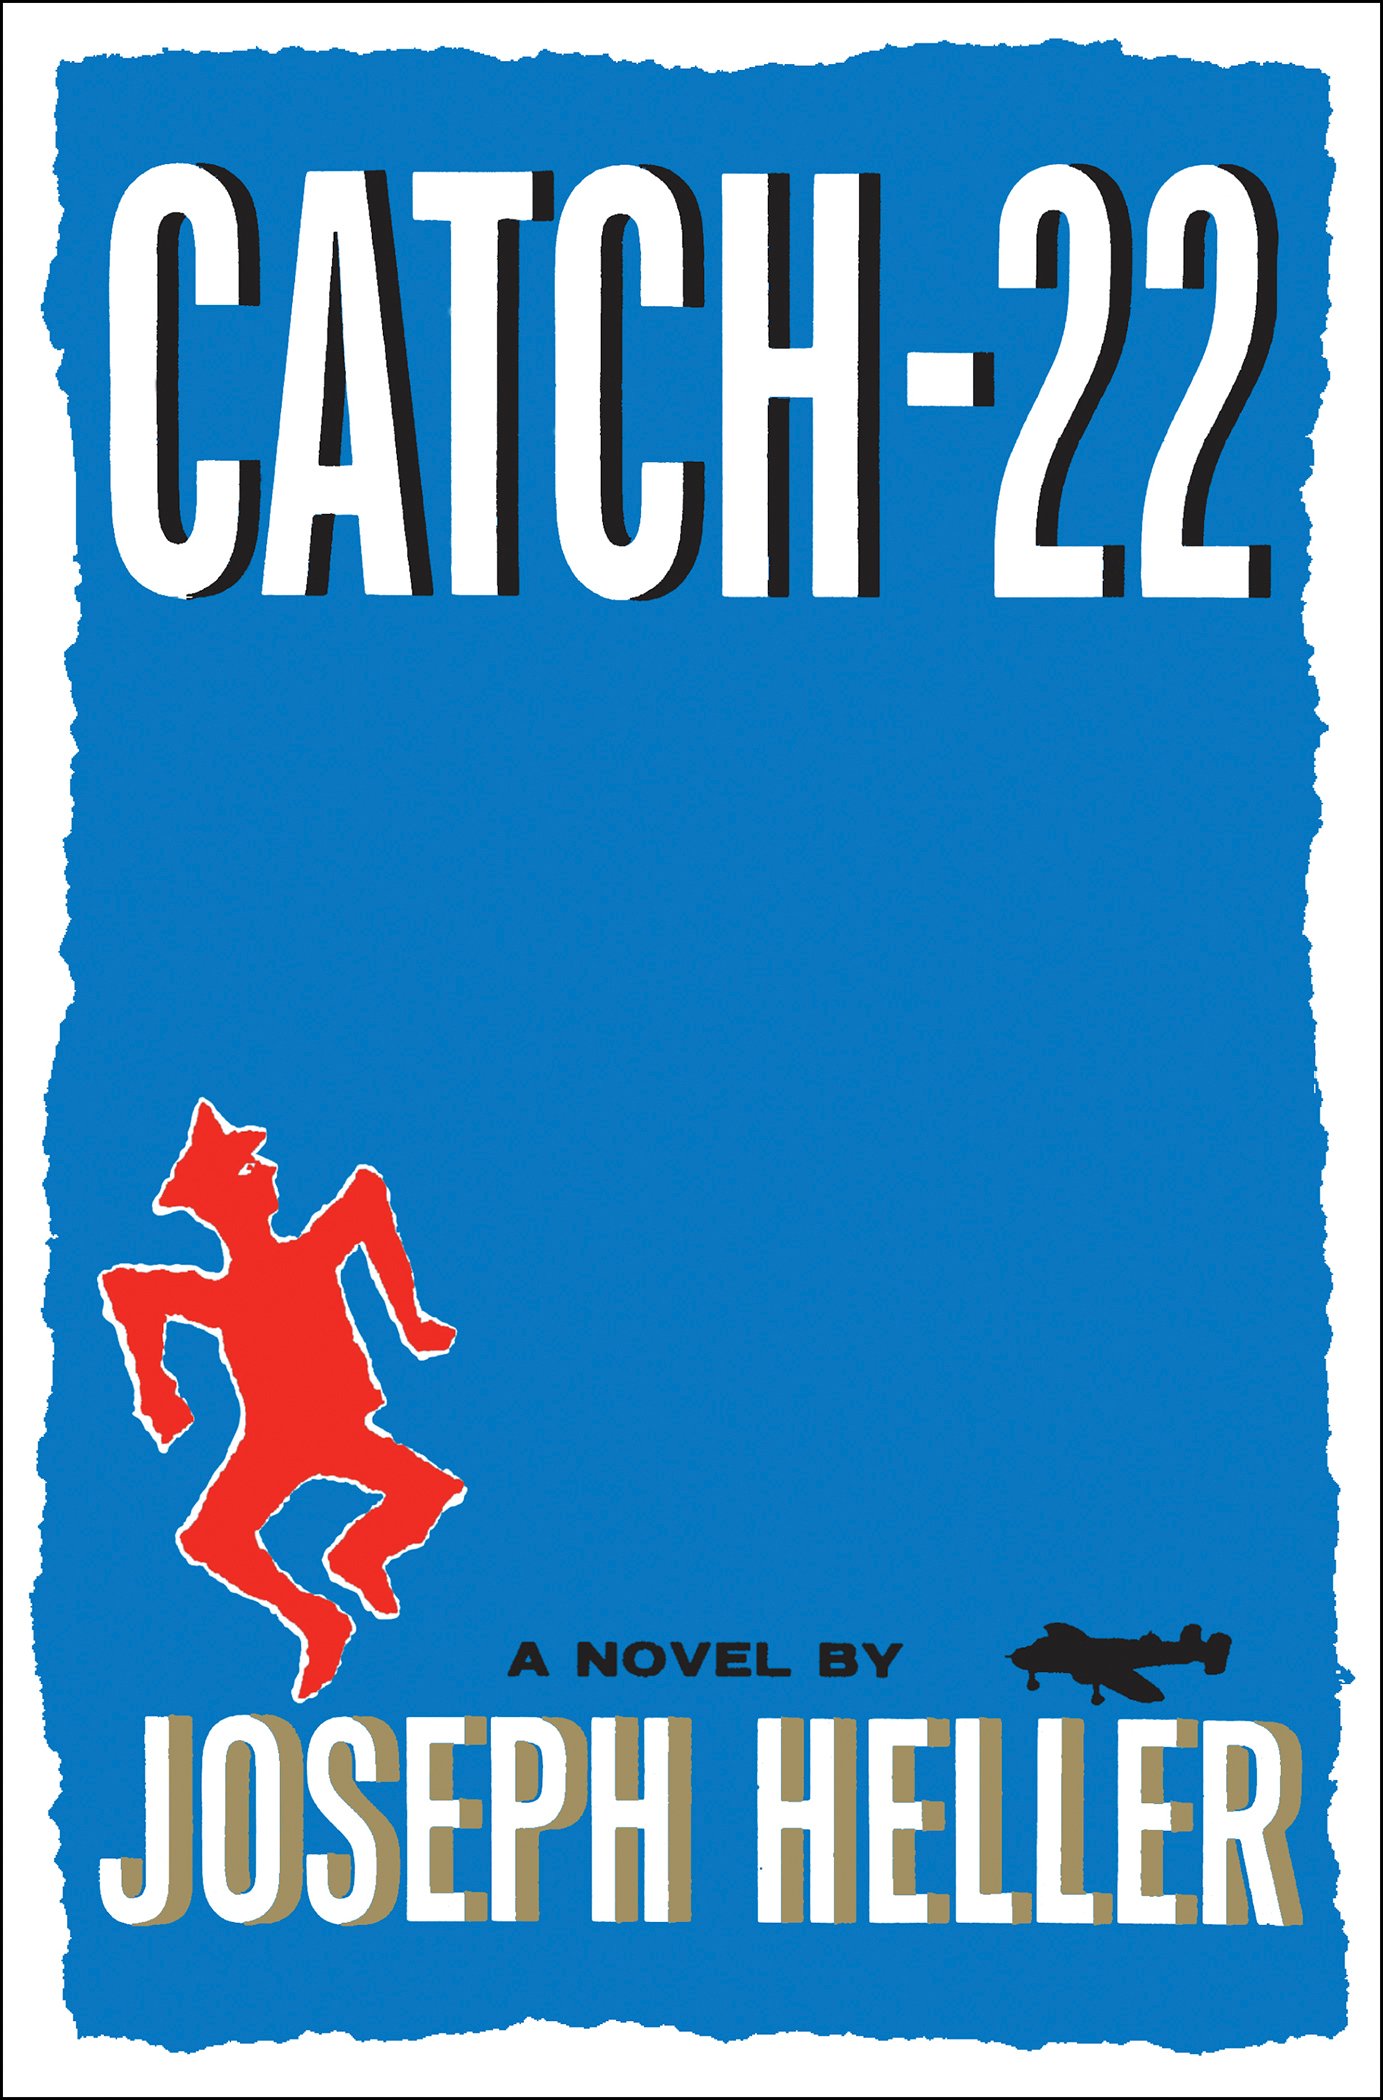 Simon & Schuster Marks Centennial With List of 100 Notable Books, From ‘Catch-22’ to ‘Eloise’